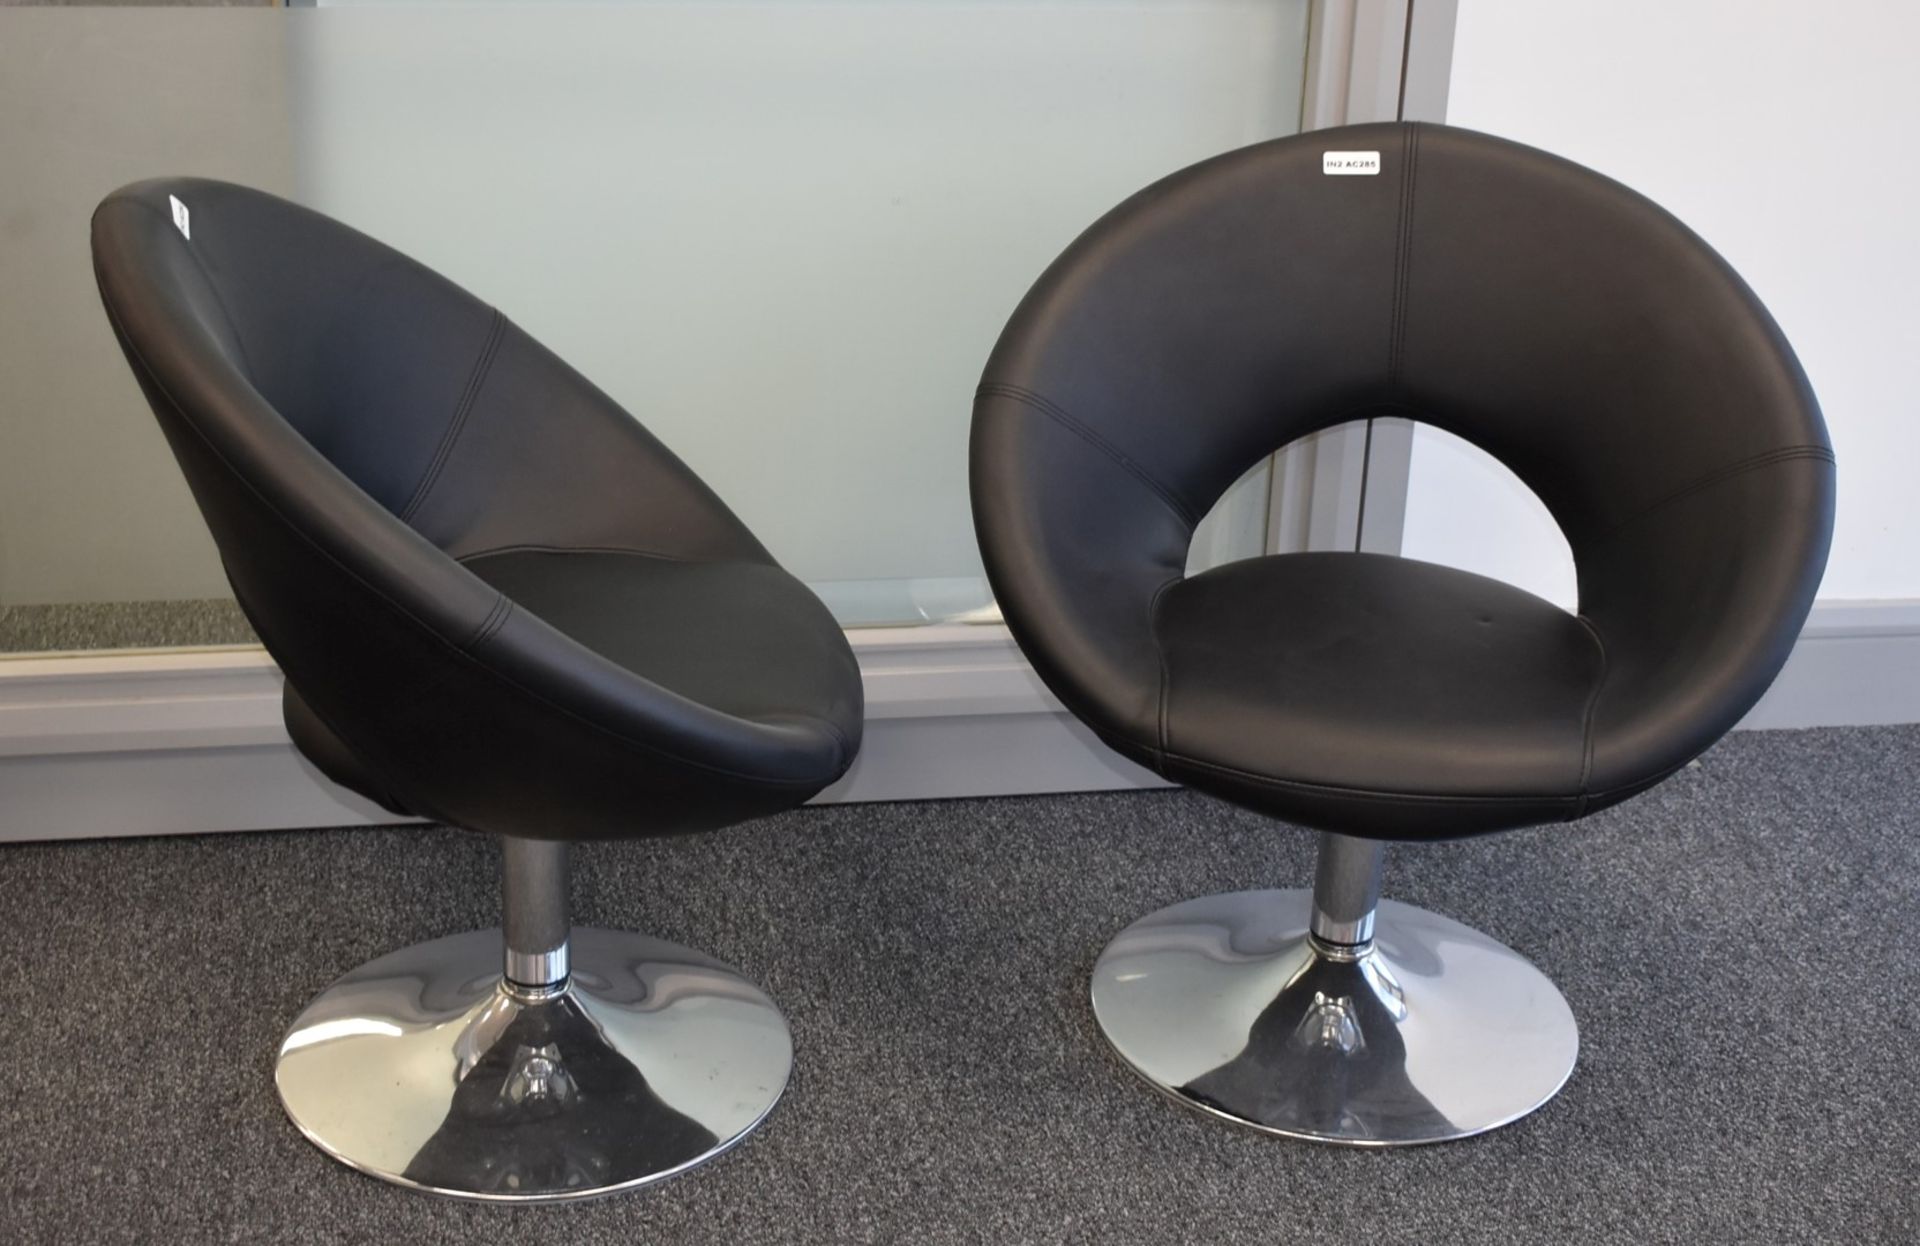 1 x Swivel Tub Chair With Black Faux Leather Upholstery and Chrome Base - 75 cms Wide - Image 4 of 5